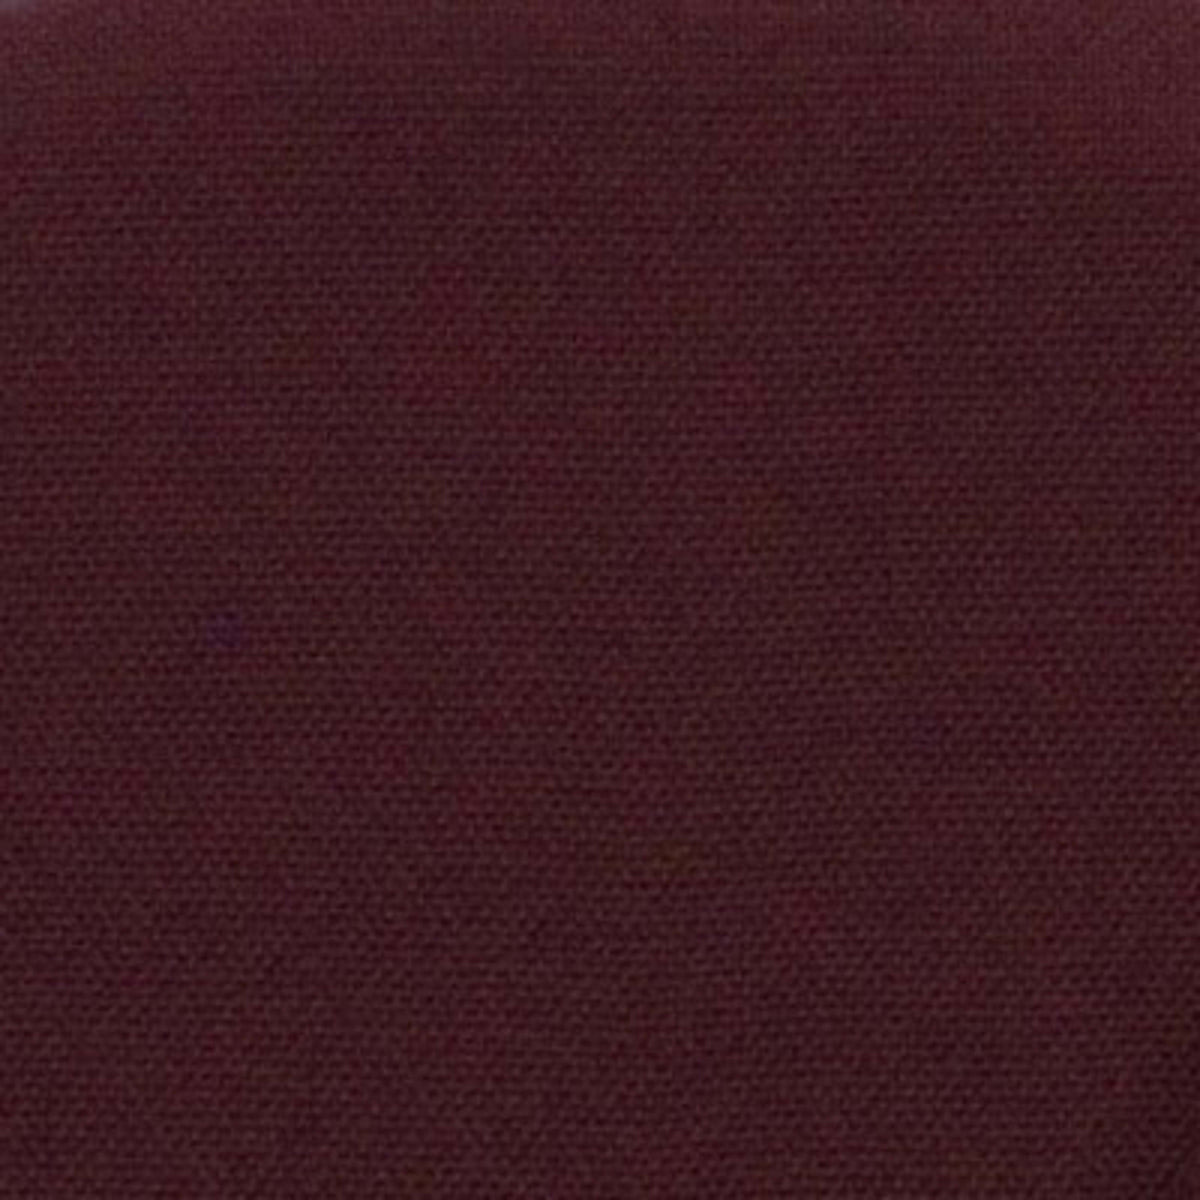 Burgundy |#| Burgundy Fabric Swivel Drafting Chair with Adjustable Height and Arms